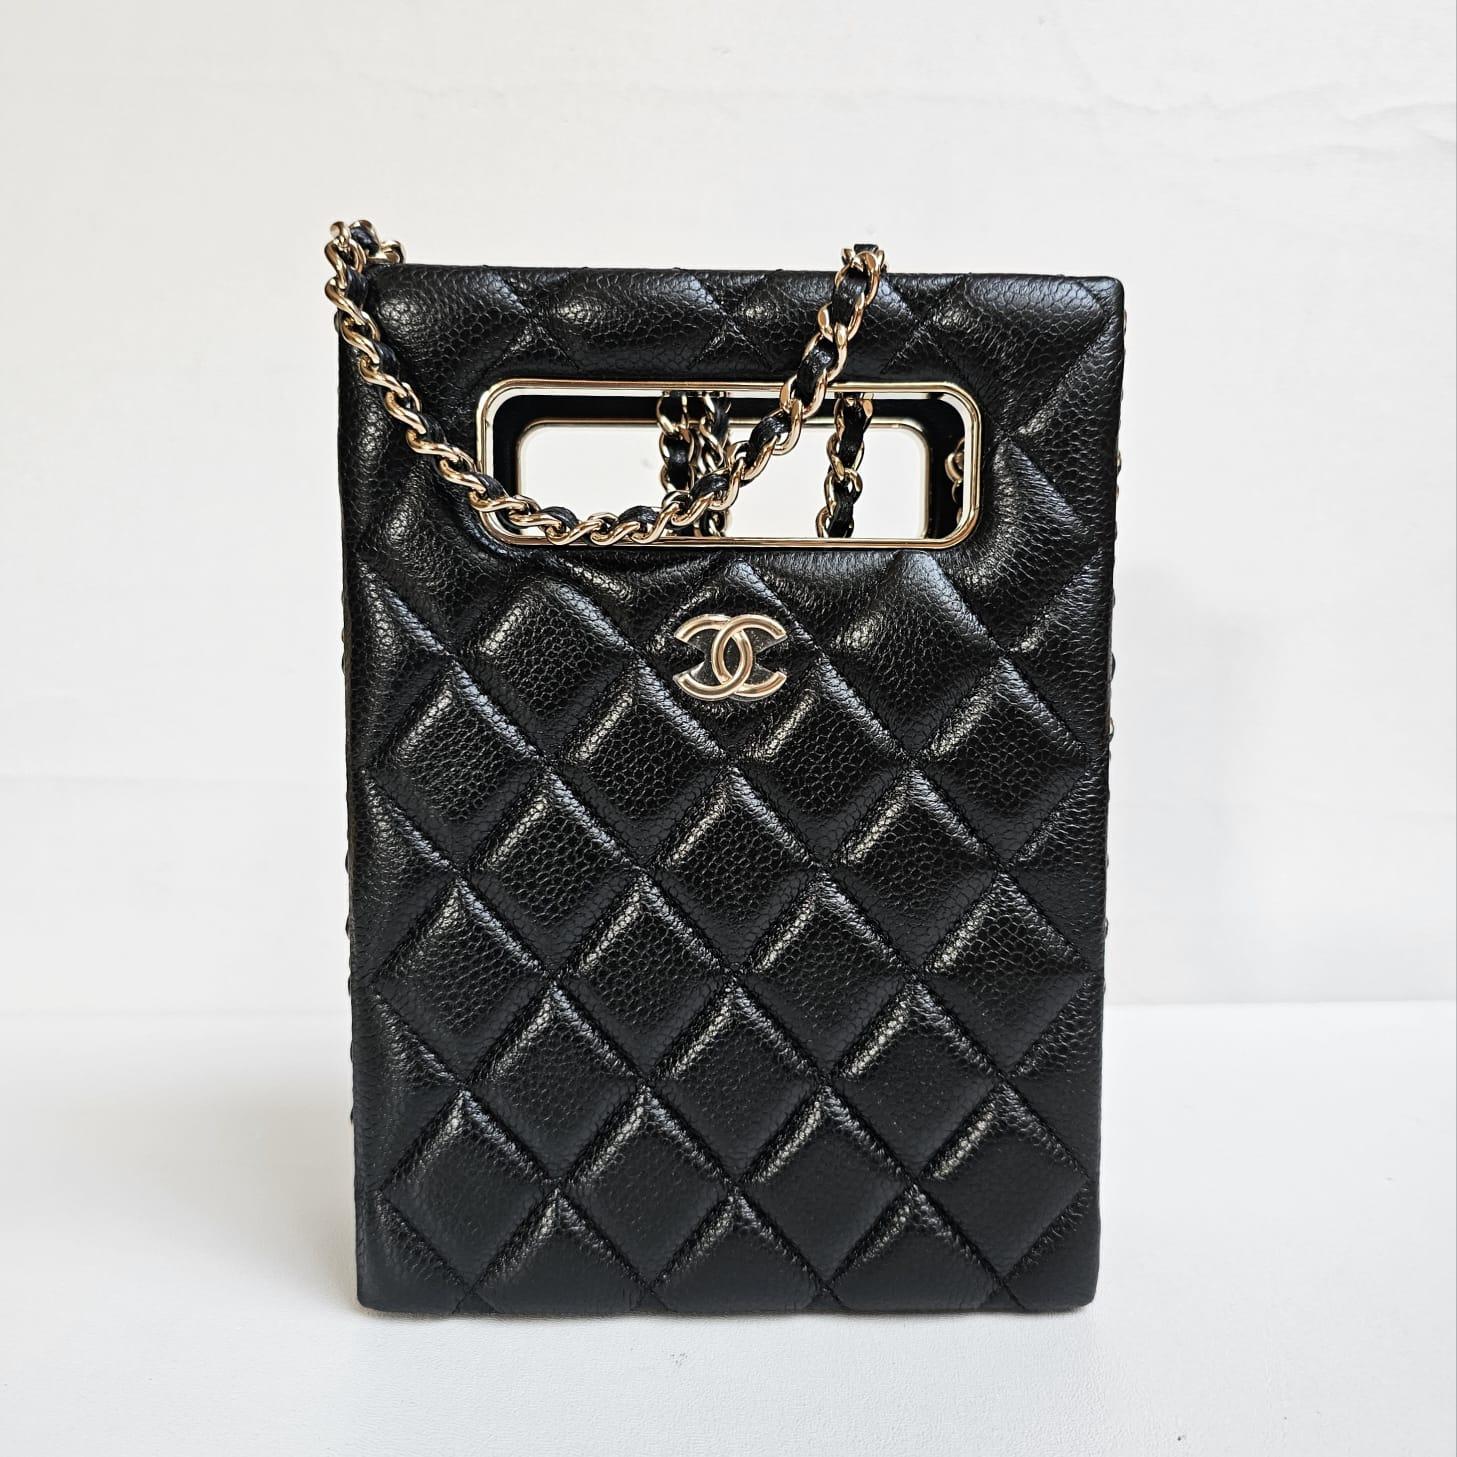 Chanel Black Caviar Quilted Evening Box Bag For Sale 13